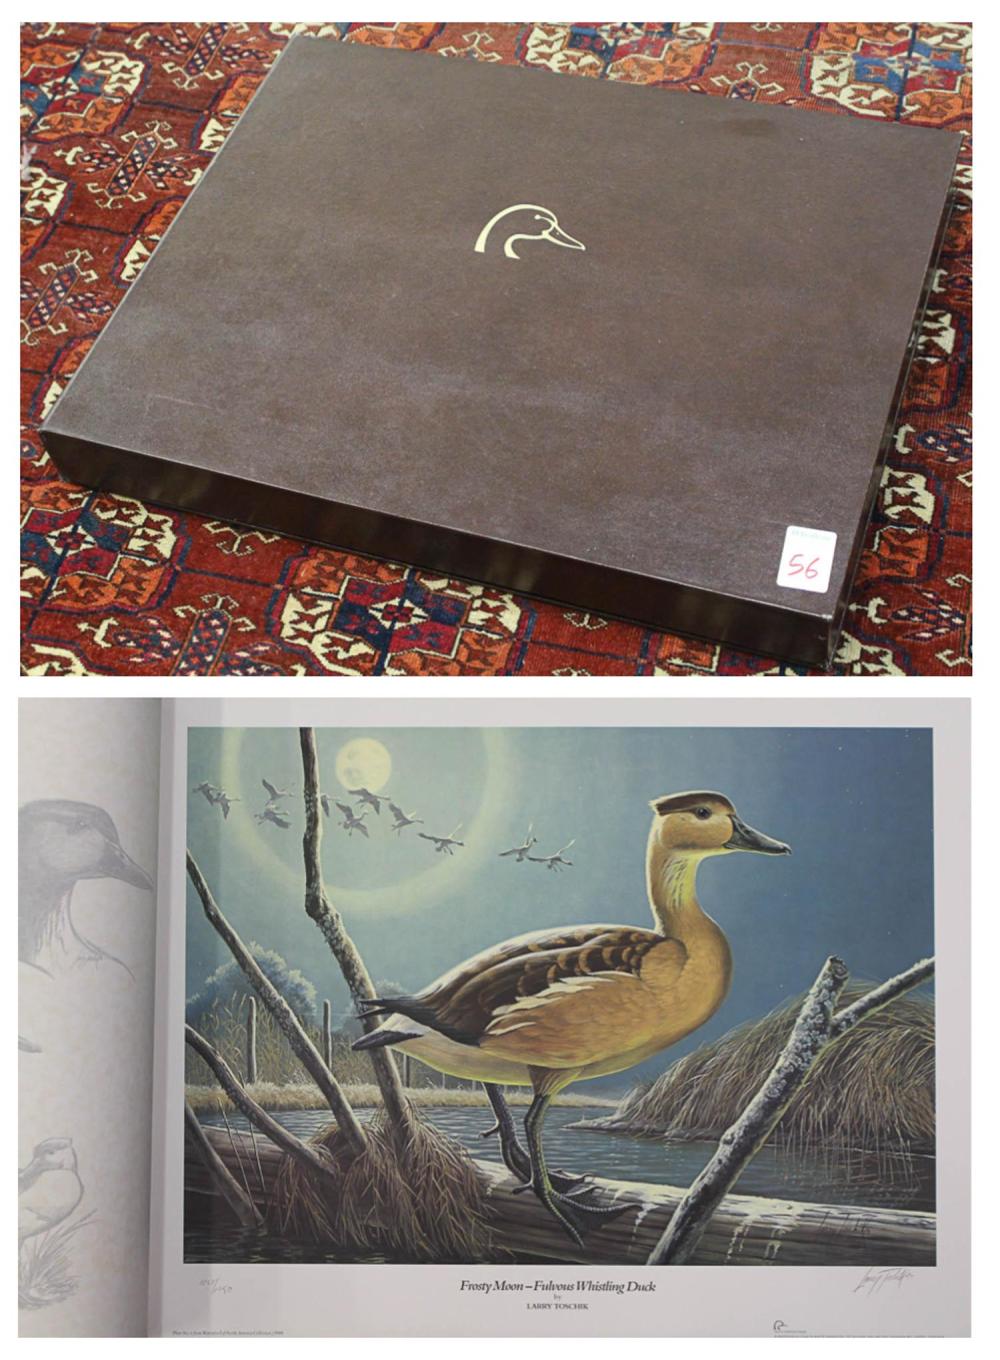 WATERFOWL OF NORTH AMERICAN: FOLIO OF